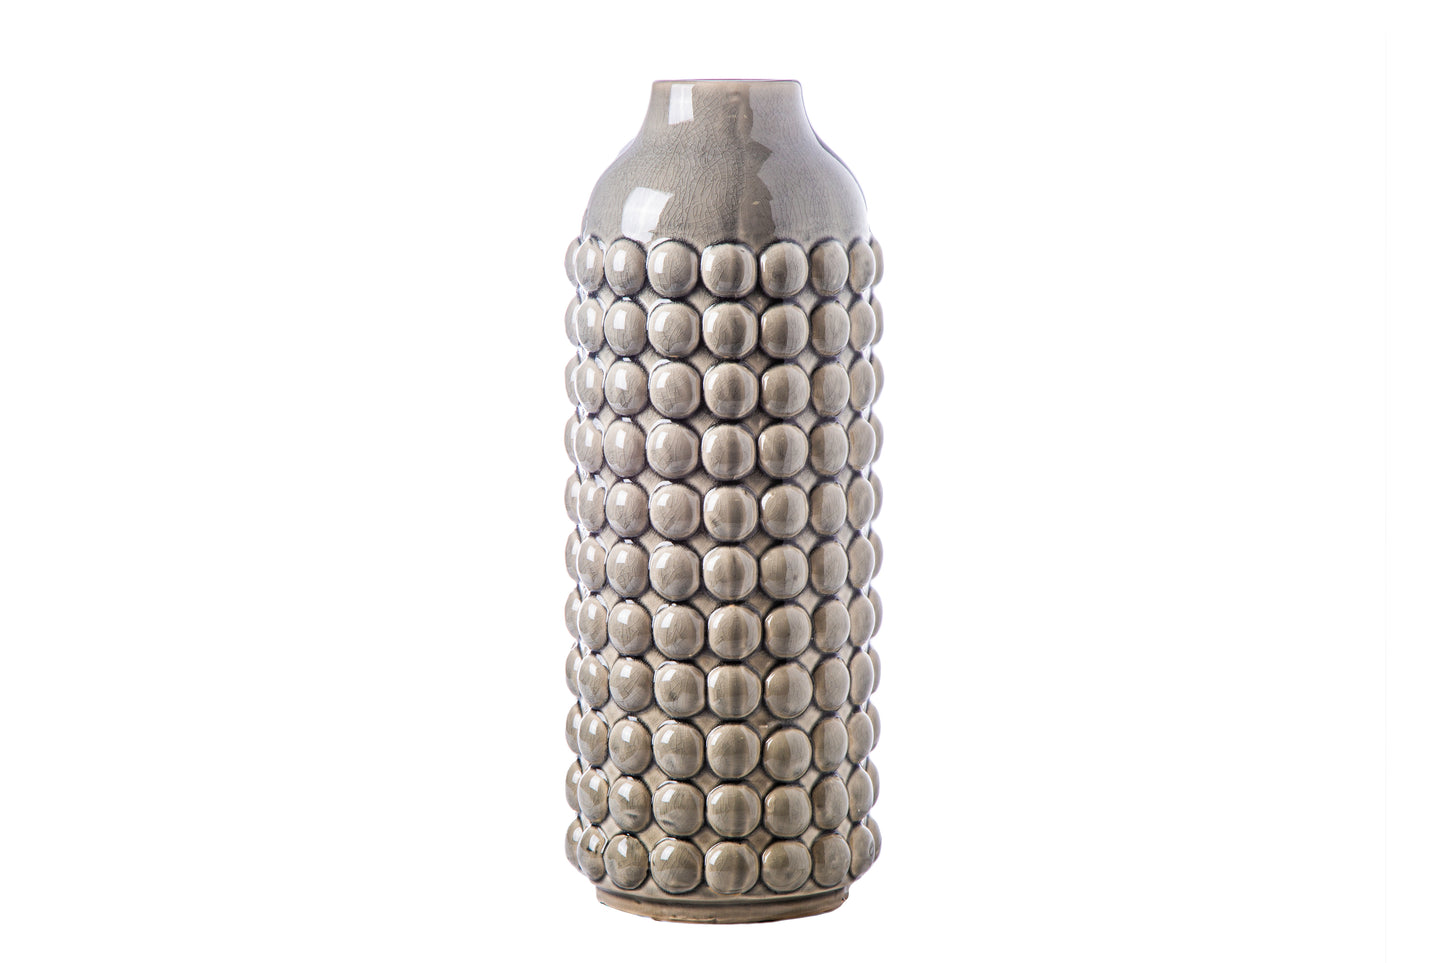 Ceramic Round Vase with Embossed Bubbled Pattern Design Body Matte Finish